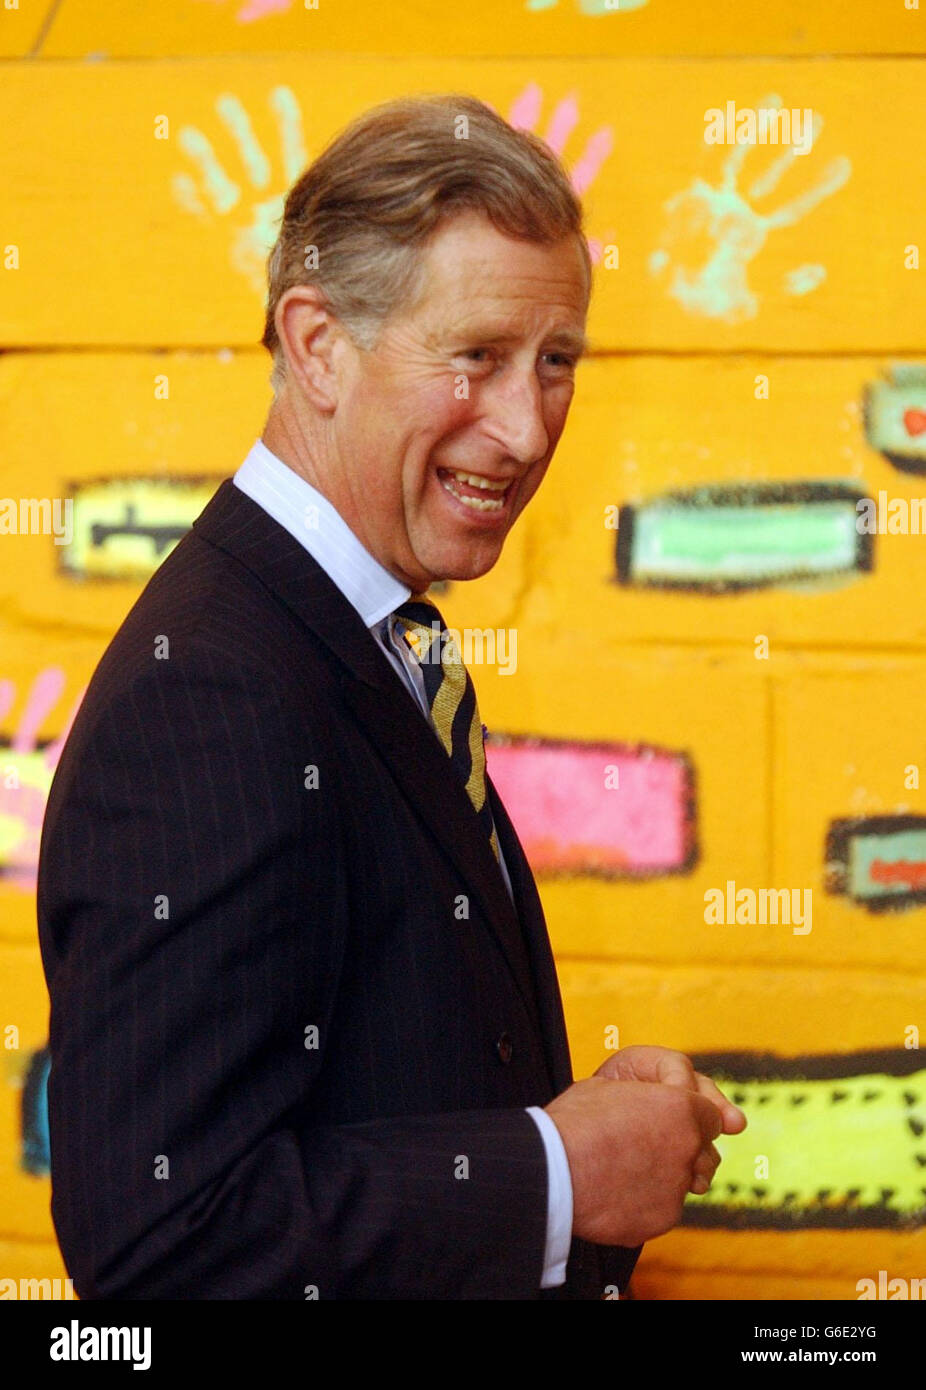 The Prince of Wales visits the Sighthill Youth Centre in Glasgow, during a tour of Scotland. * During the visit to the housing estate - one of the most deprived in the country - the Prince was shown what efforts have been made to overcome the area's bad image. The Prince visited the scheme with Prince William in 2001, when the area was in the midst of racial tension following the murder of asylum seeker Firsat Dag. Stock Photo